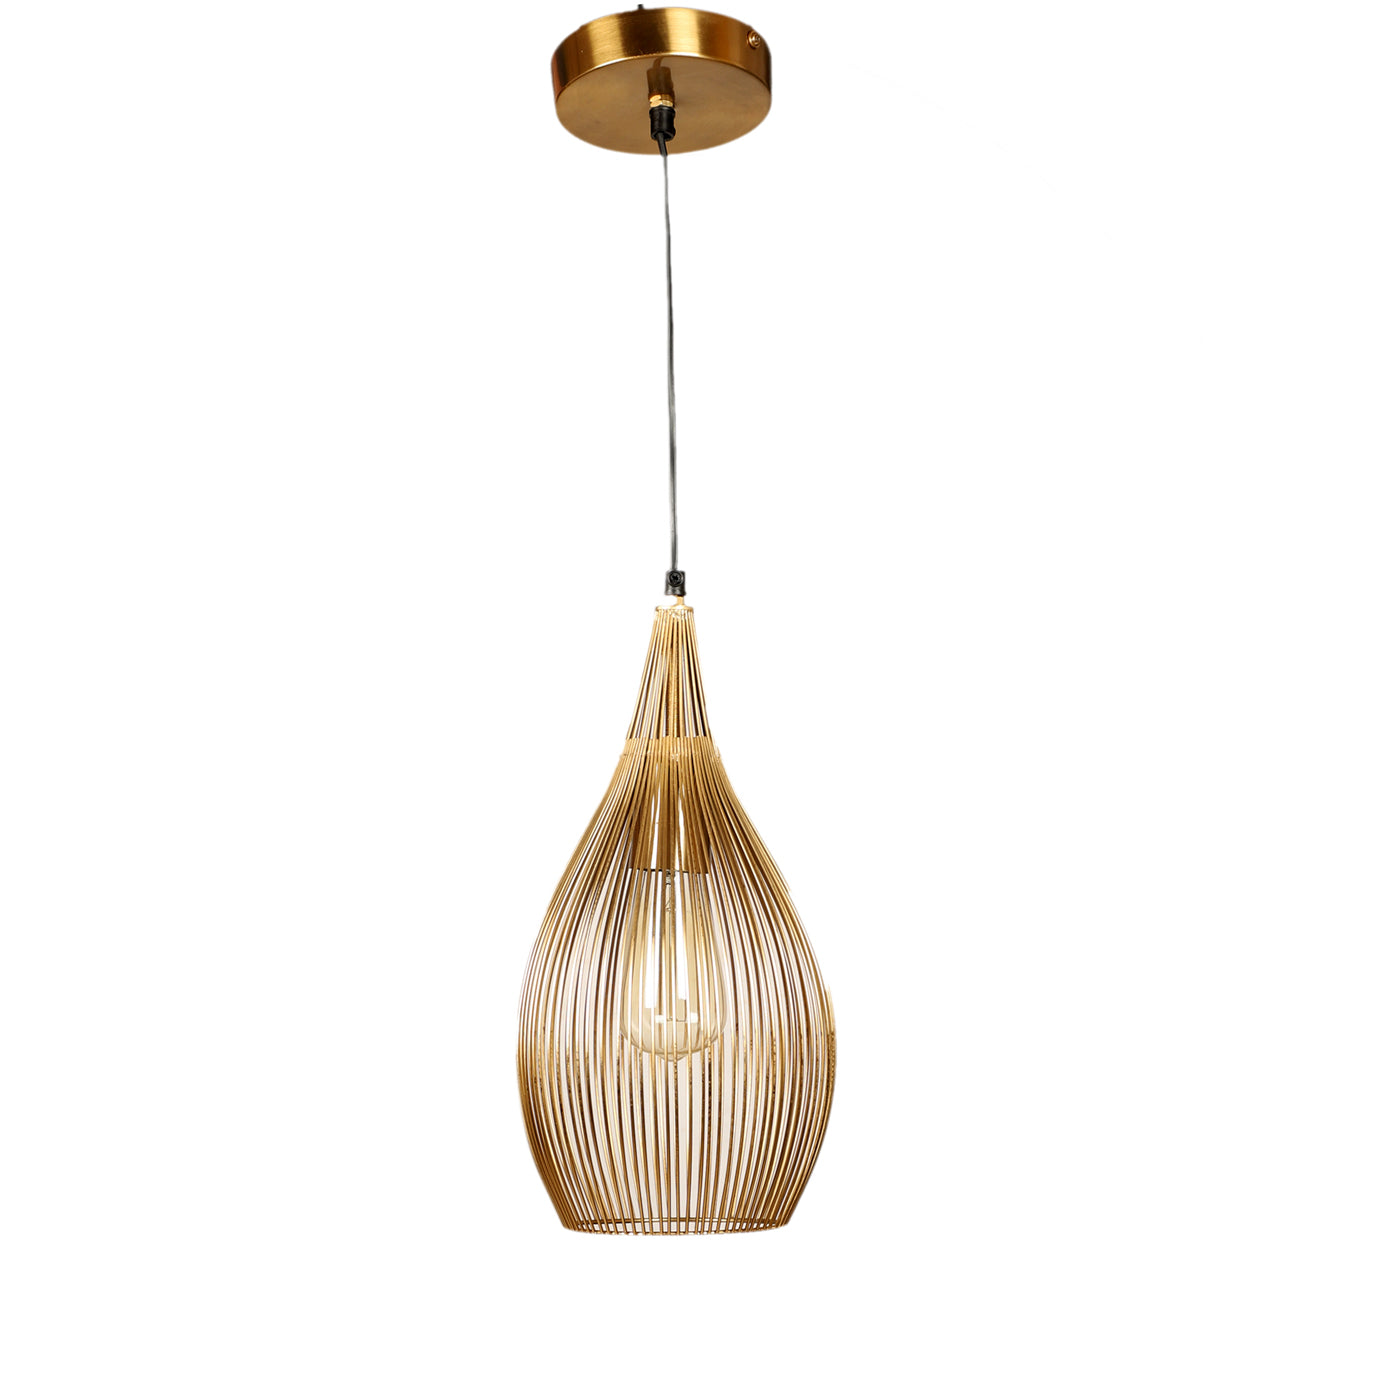 "The Wired Pendant Light" in Heavy Gold Finish